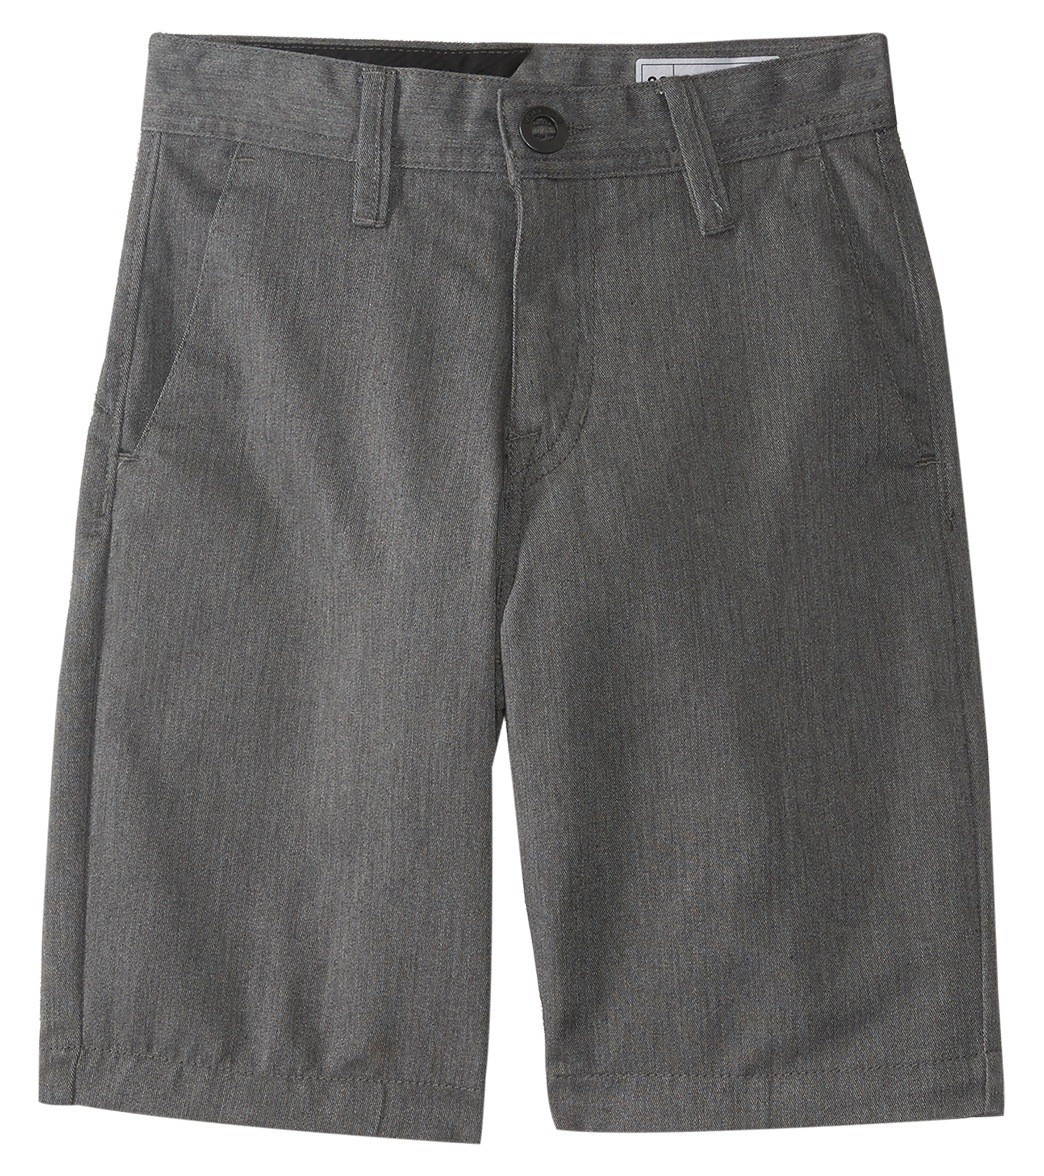 Volcom Boys' Frickin Chino Short Toddler/Little/Big Kid - Charcoal Heather 22 Big Cotton/Polyester - Swimoutlet.com